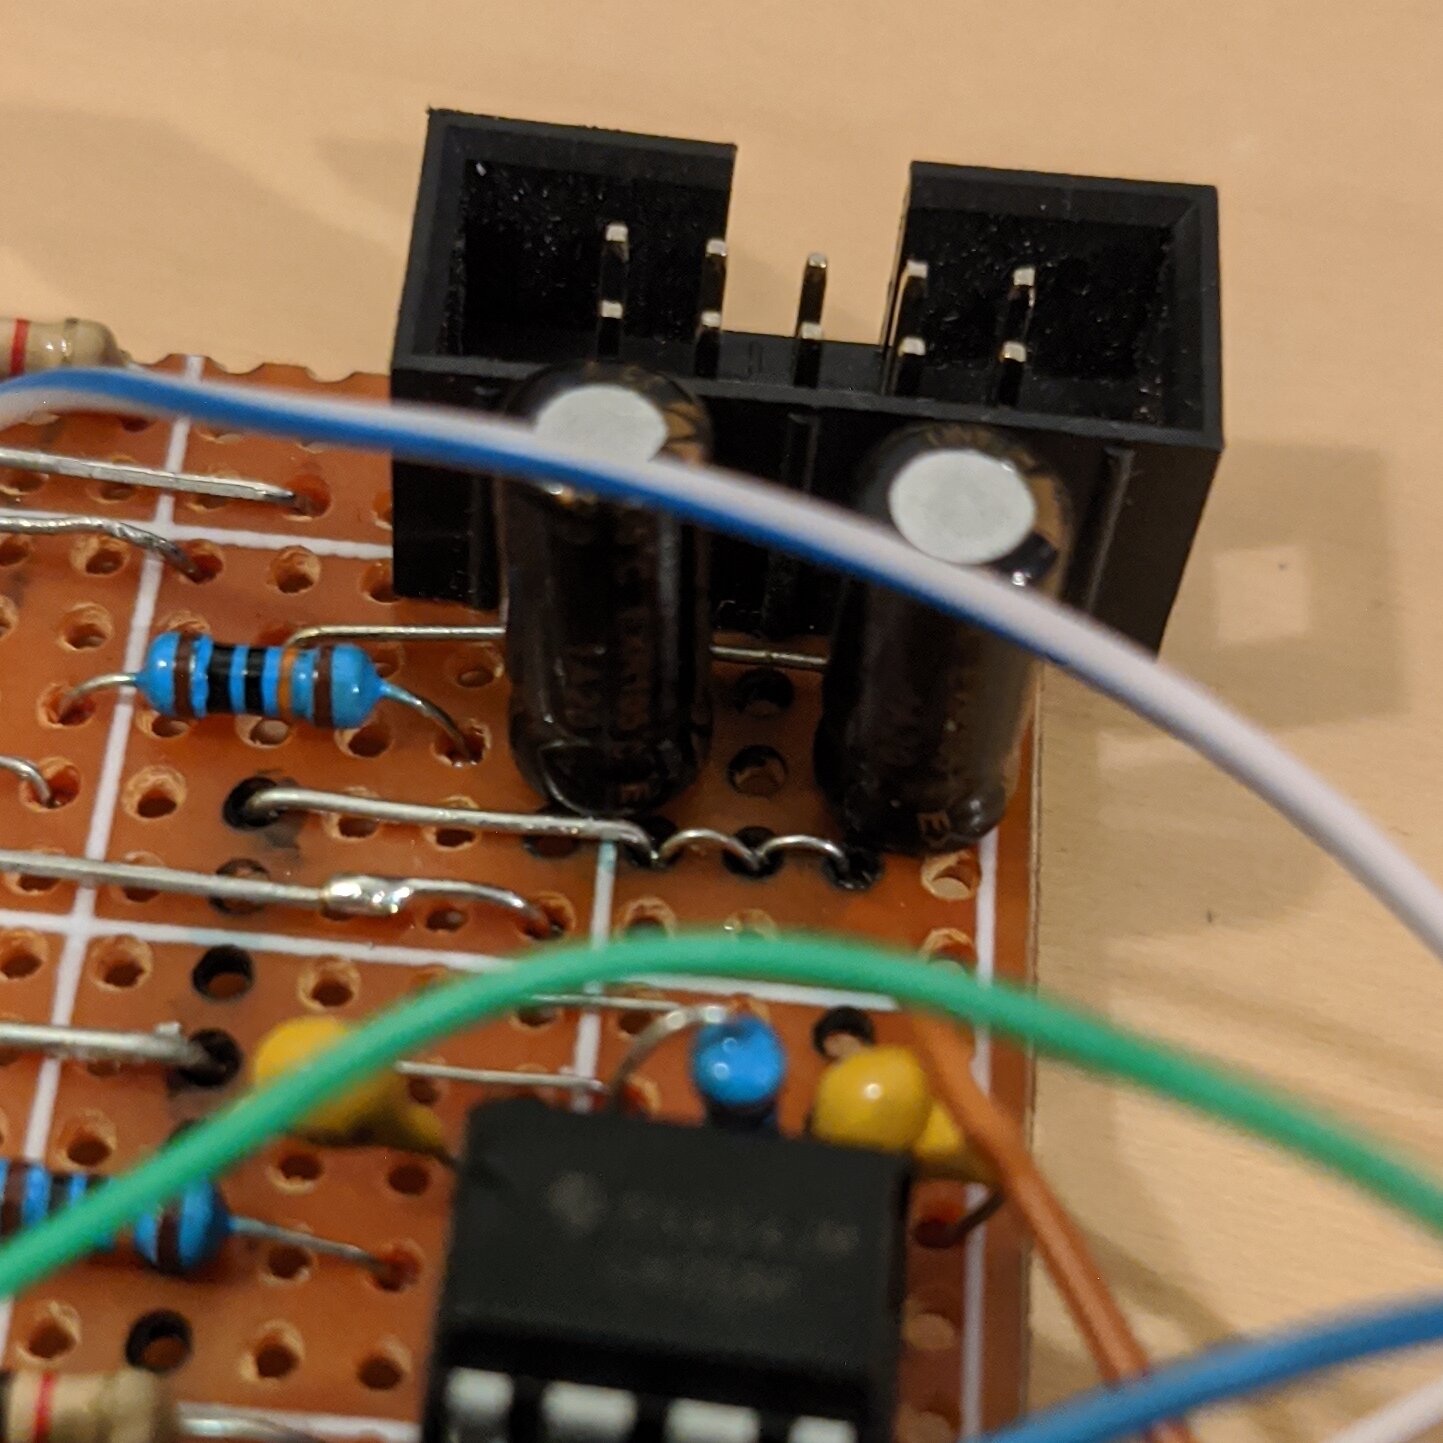 Closeup of power input connector and jumpers on the board